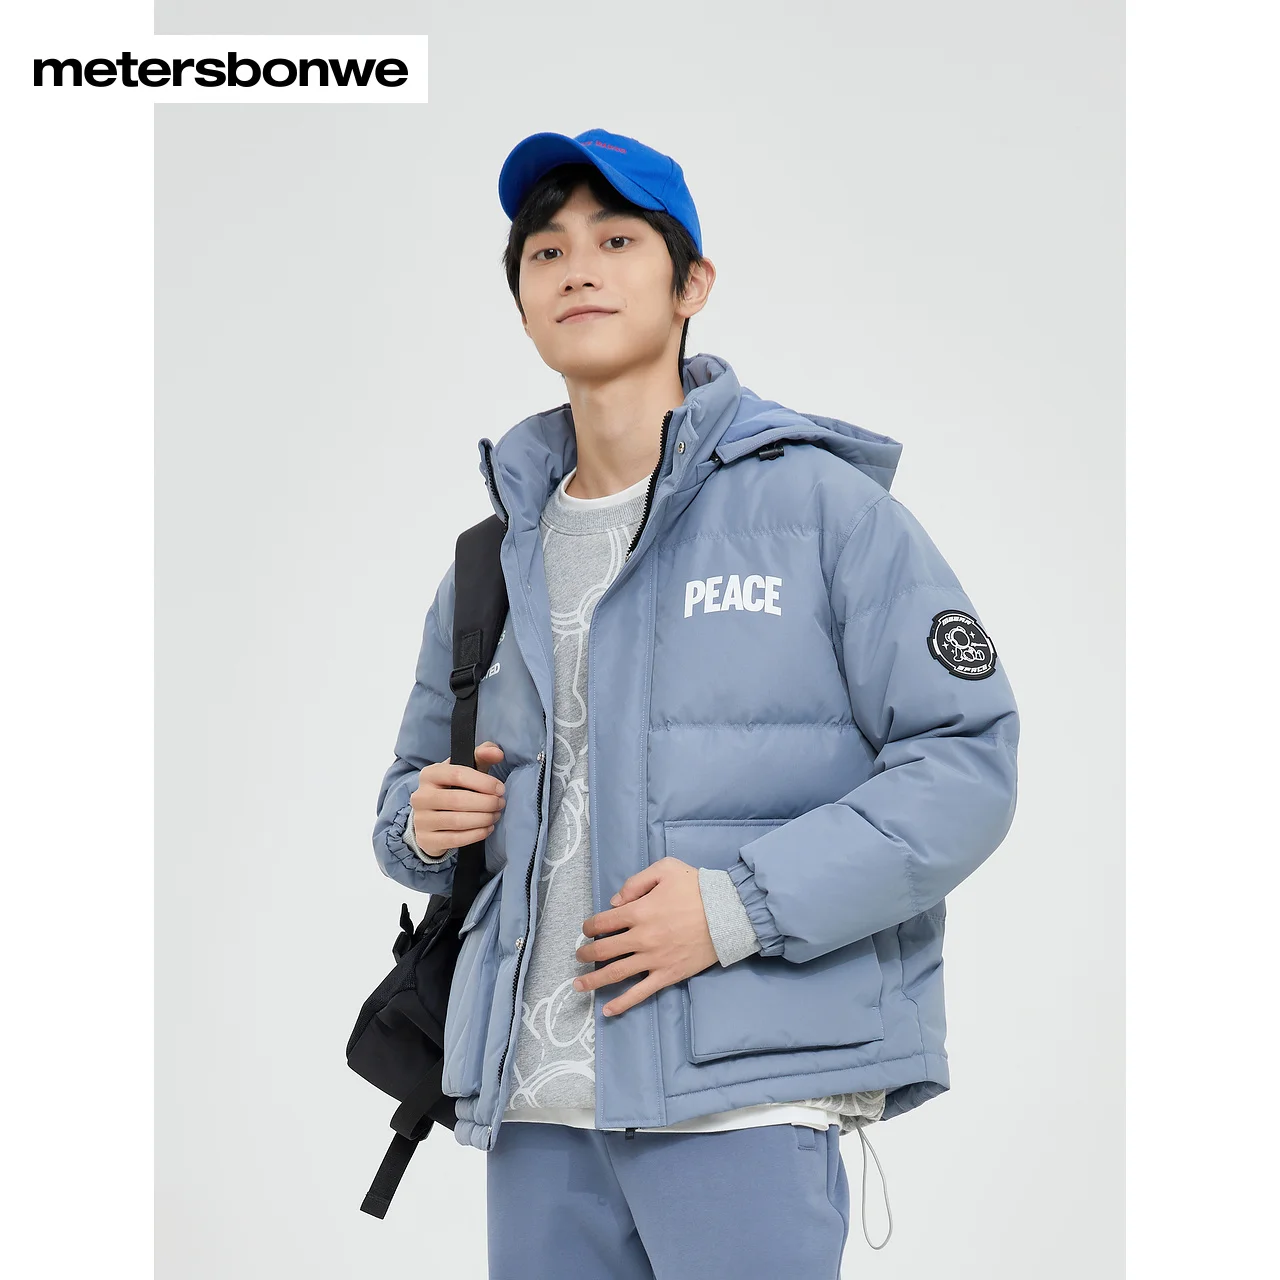 Metersbonwe Men's 22New Winte Stand Collar Hooded Down Jacket Thick Removable Cap Short Warm Wear Fashion Youth Teenage Outwear